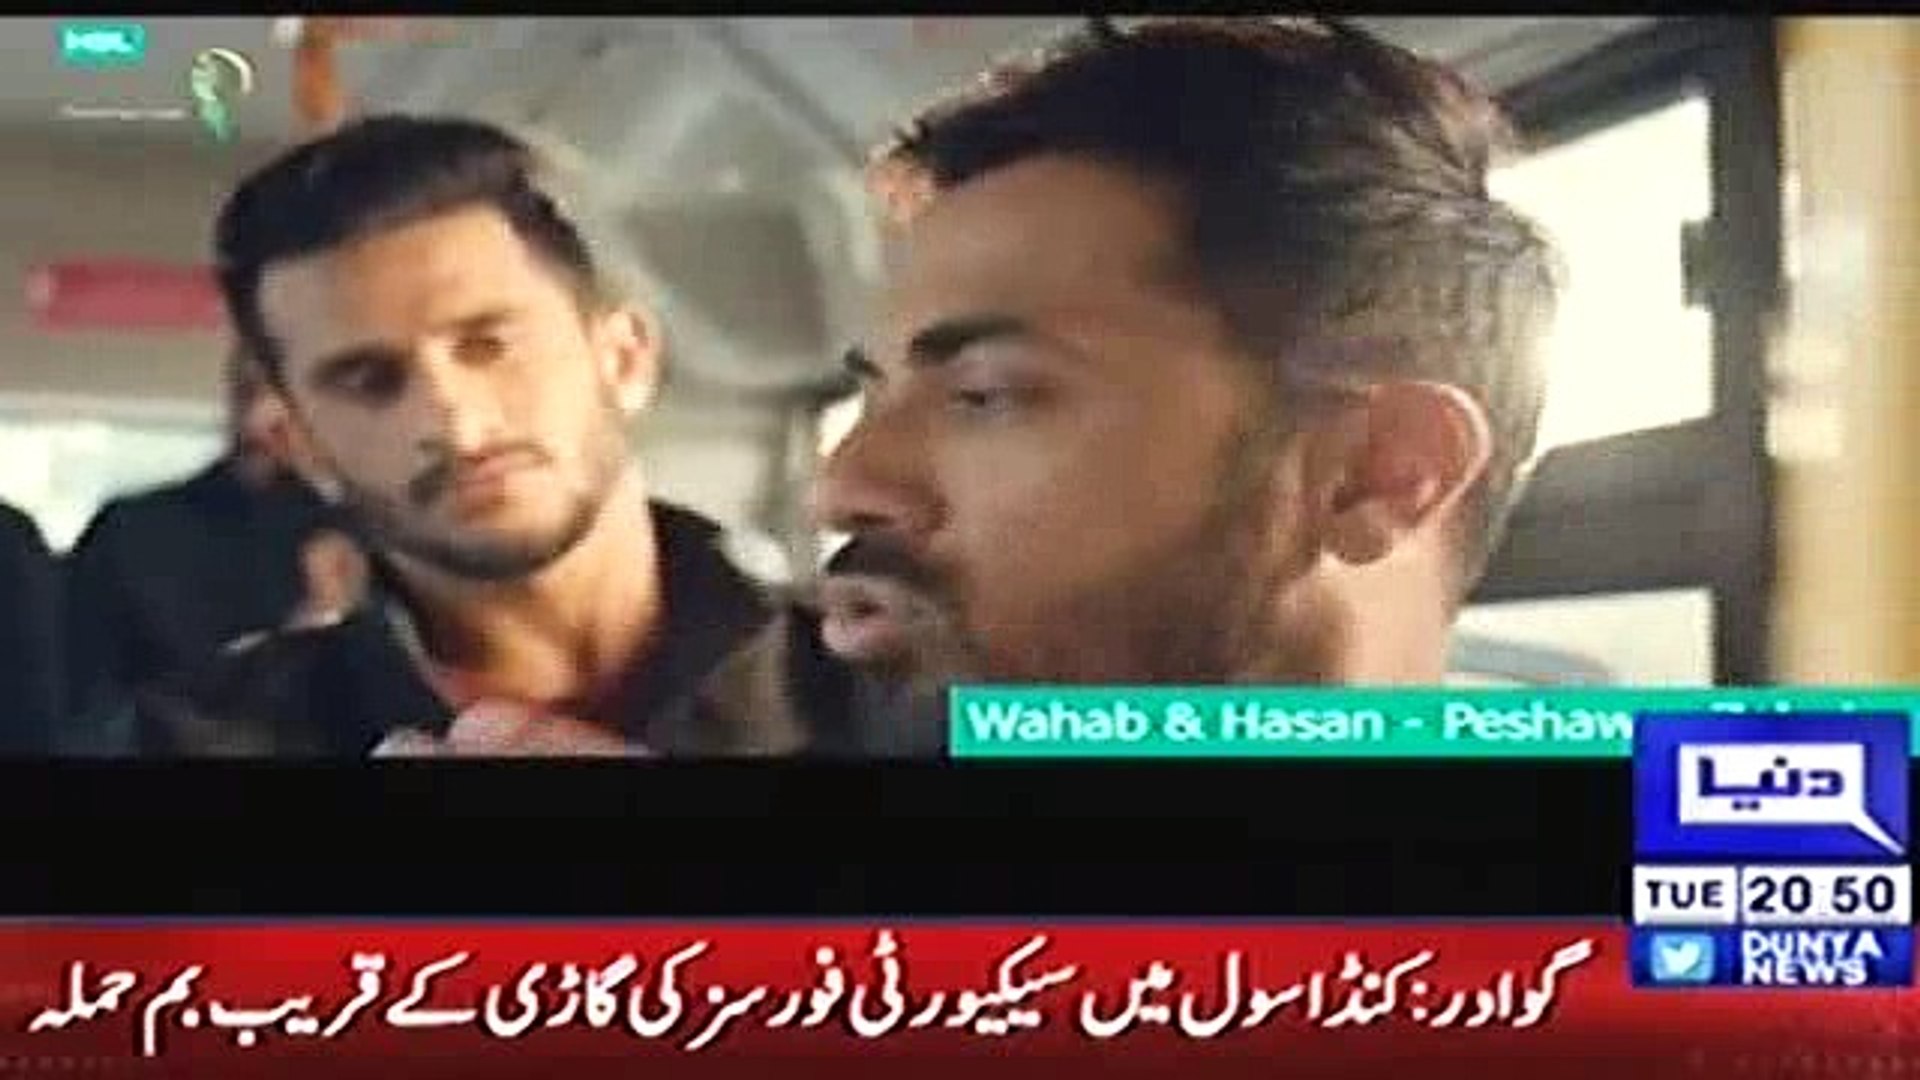 HBL PSL 3 New Funny Ad Ft. Wahab Riaz, Hassan Ali And Fakhar Zaman - video  Dailymotion